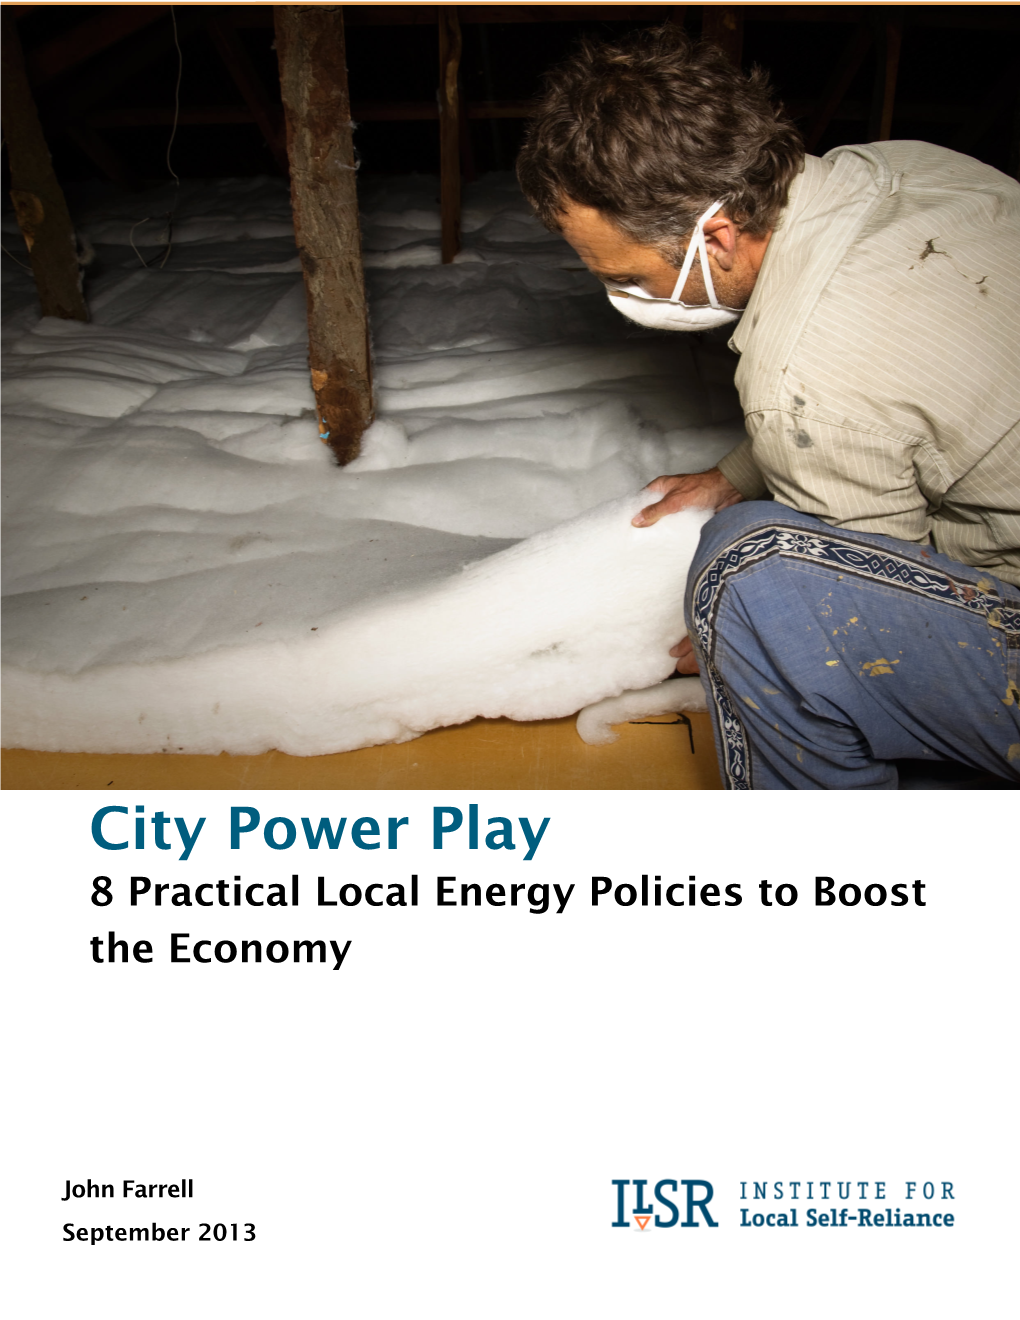 City Power Play: 8 Practical Local Energy Policies to Boost the Economy